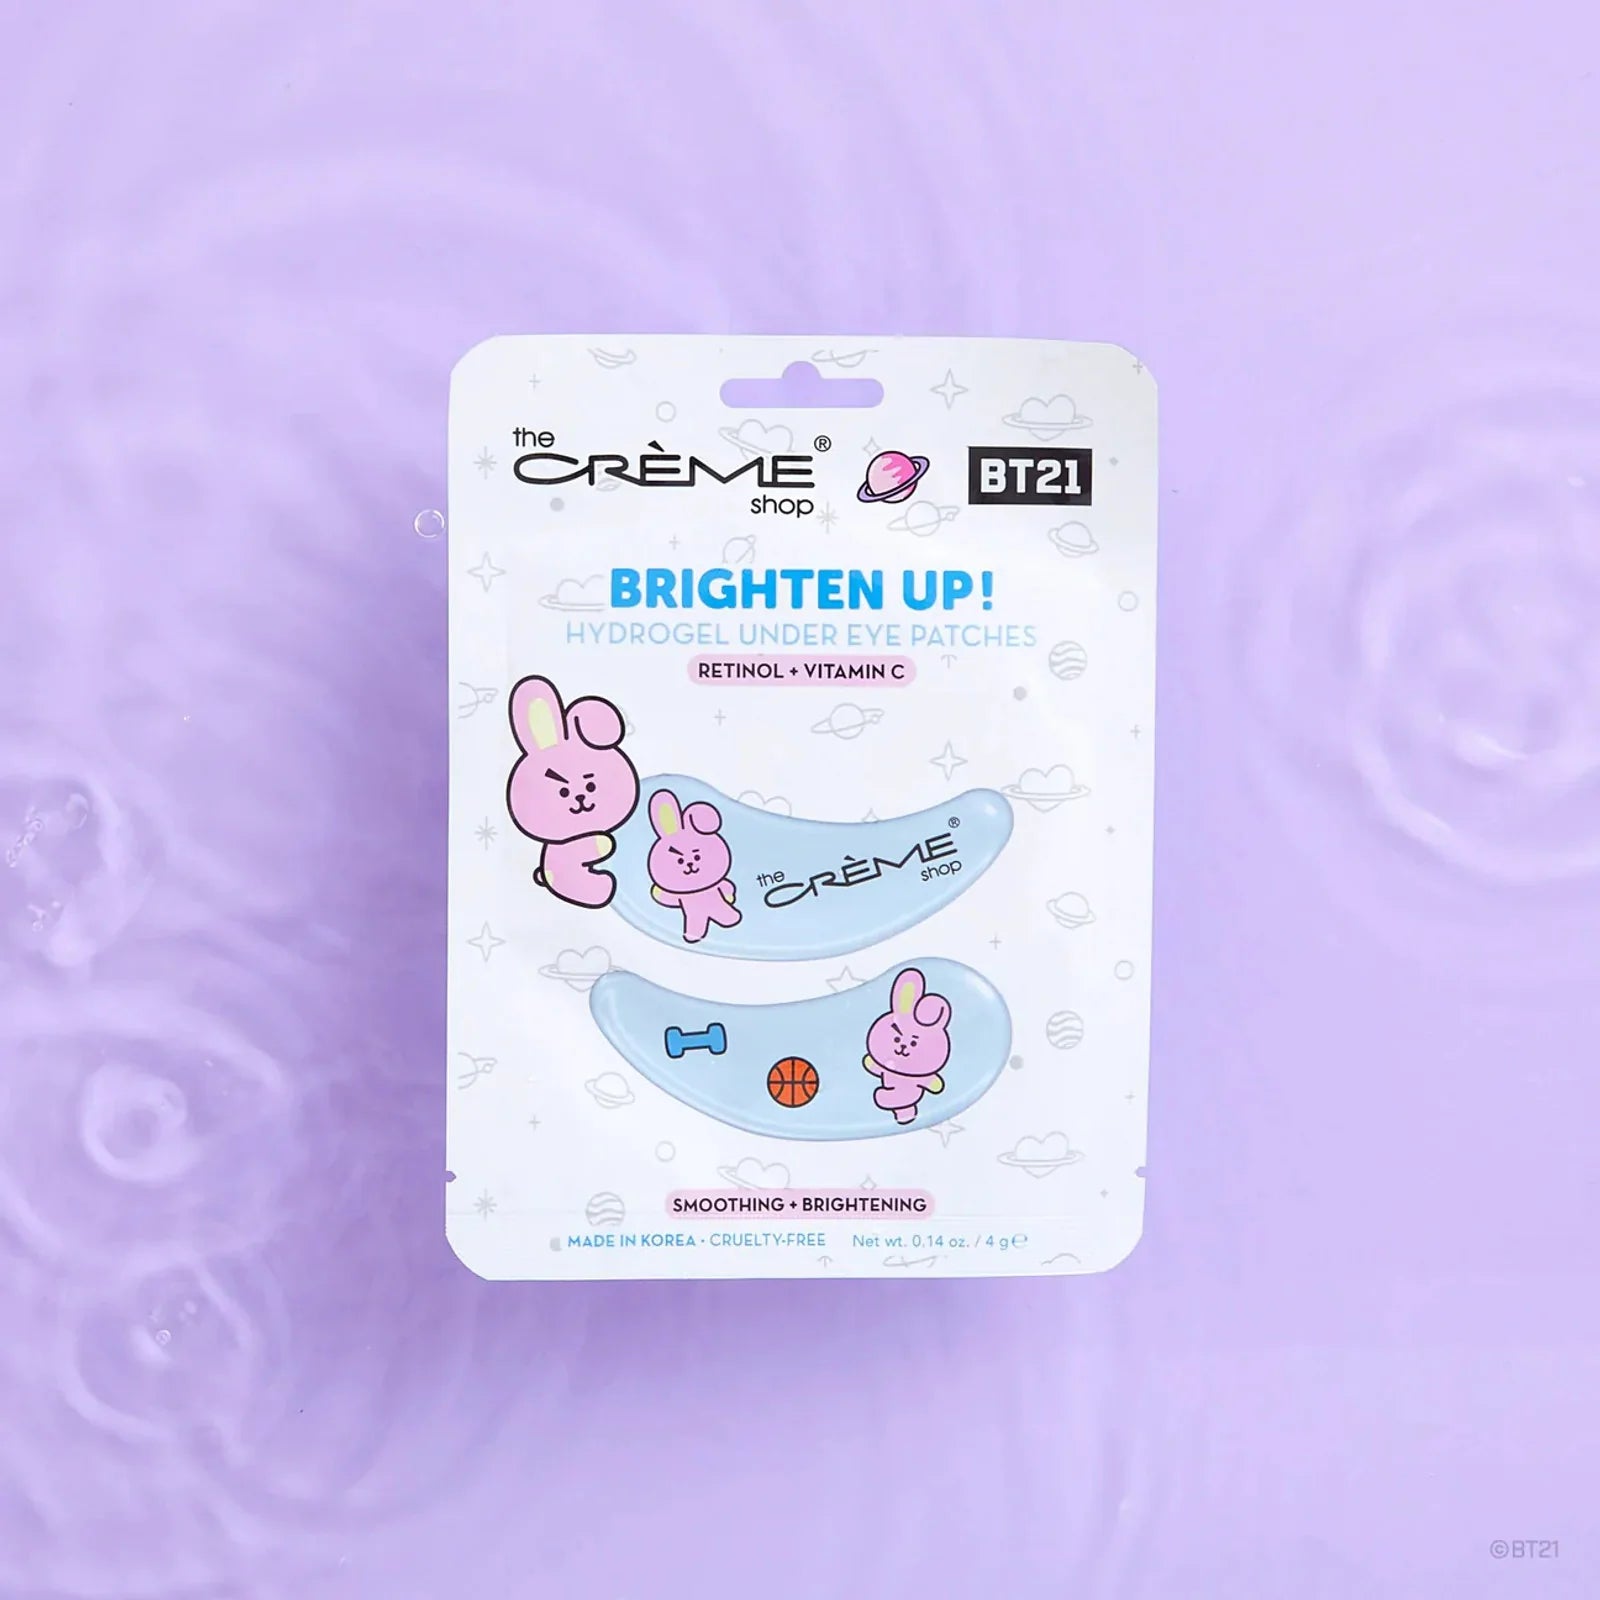 The Creme Shop - BT21 Brighten Up! COOKY Hydrogel Under Eye Patches Smoothing + Brightening